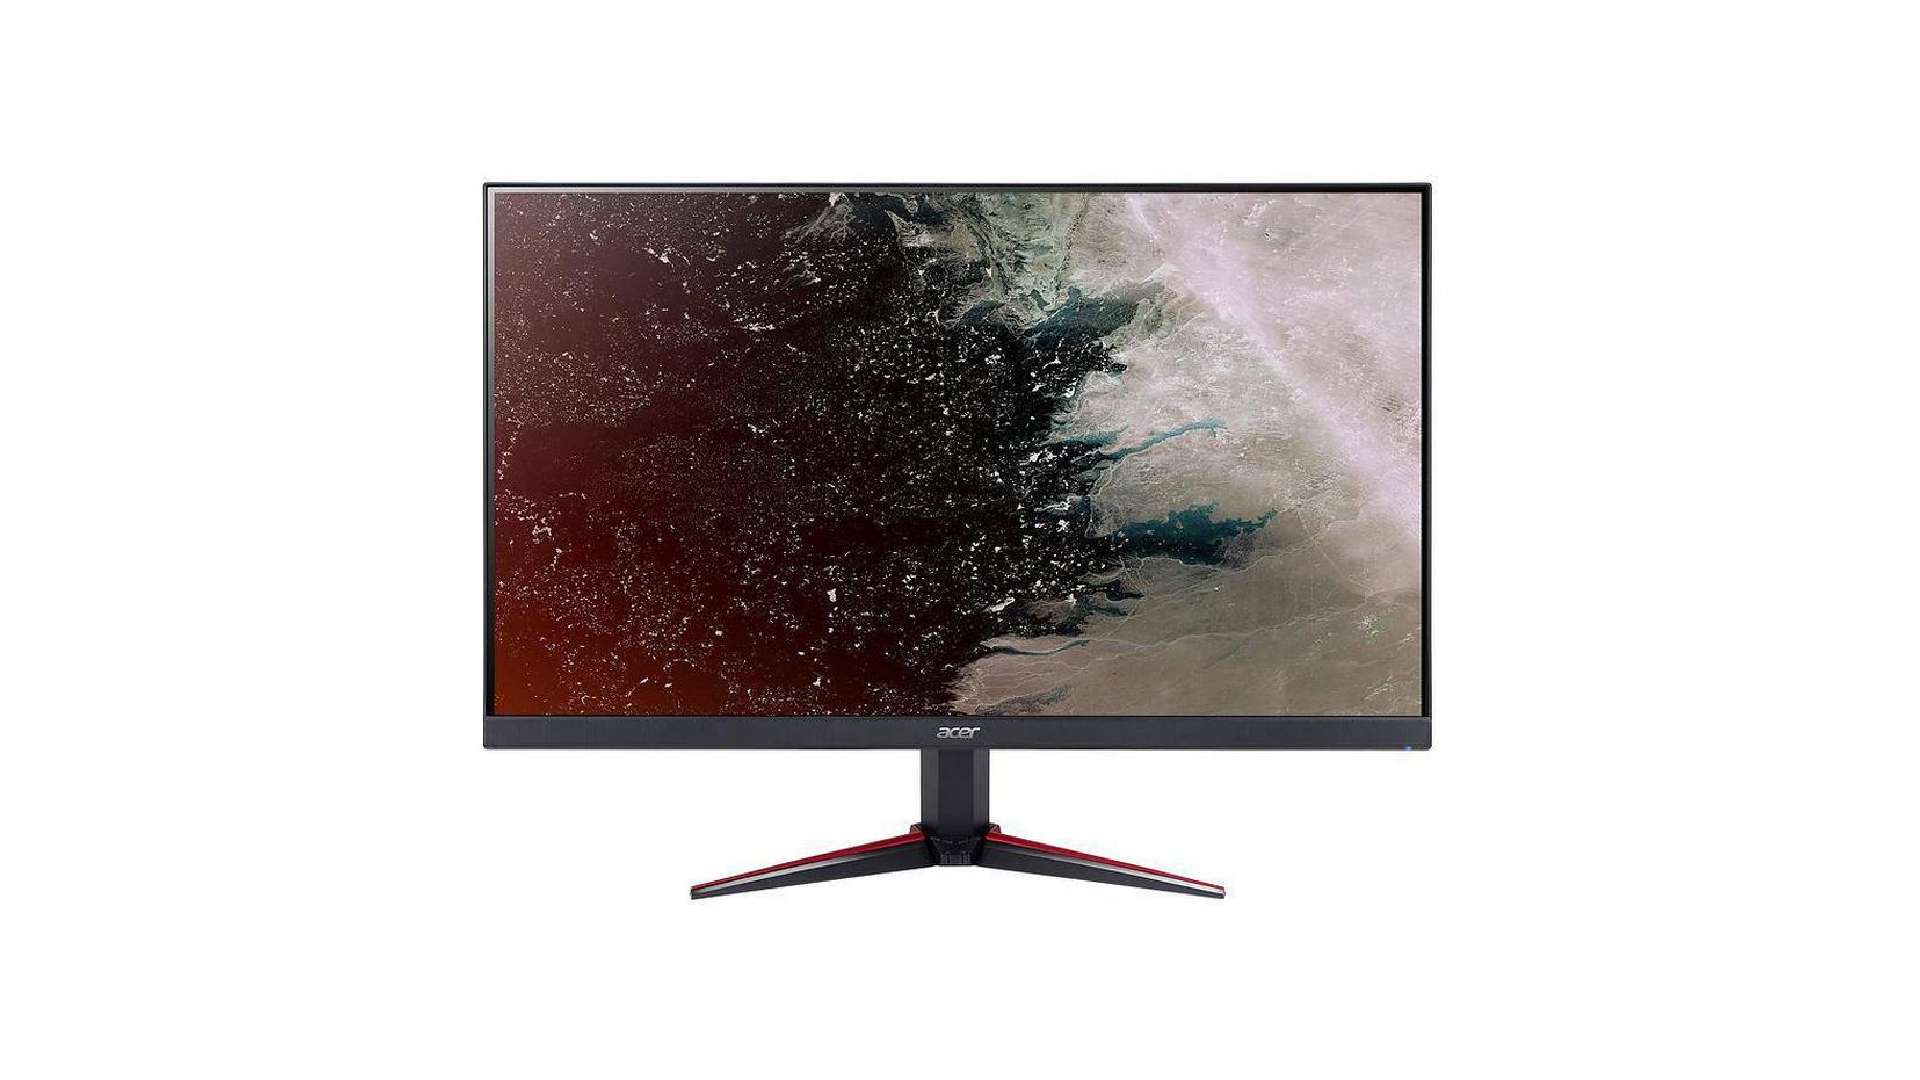 The Acer Nitro VG240Y gaming monitor faces forward in a product photo against a white background